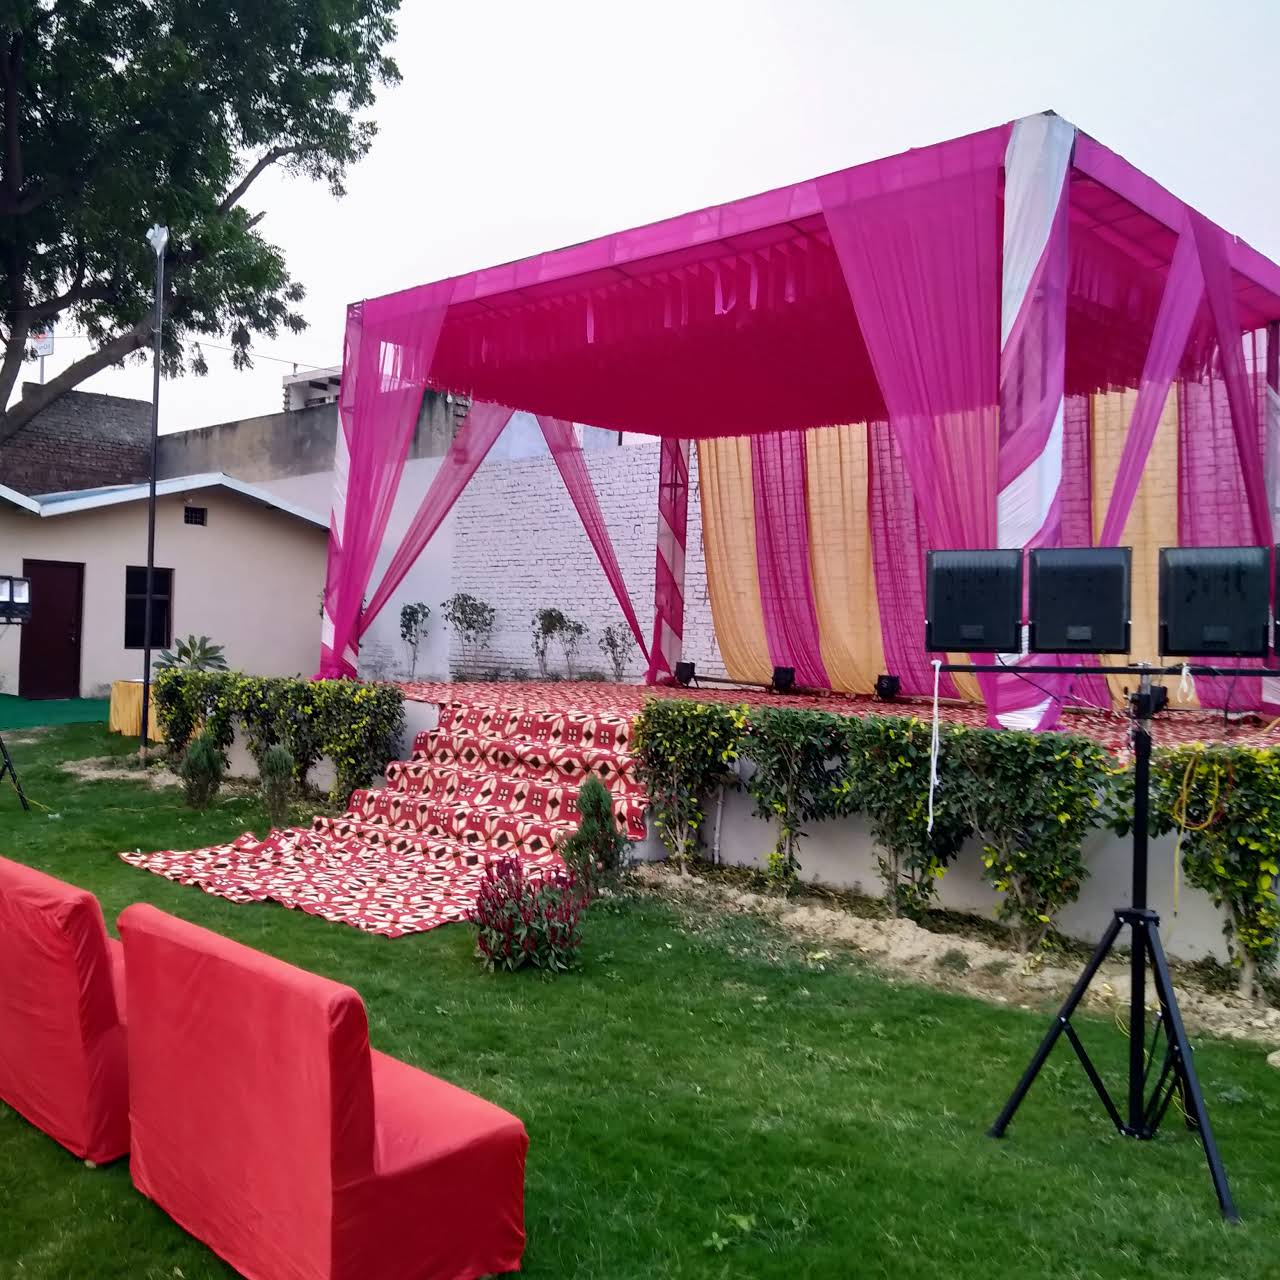 Leela Farms|Catering Services|Event Services